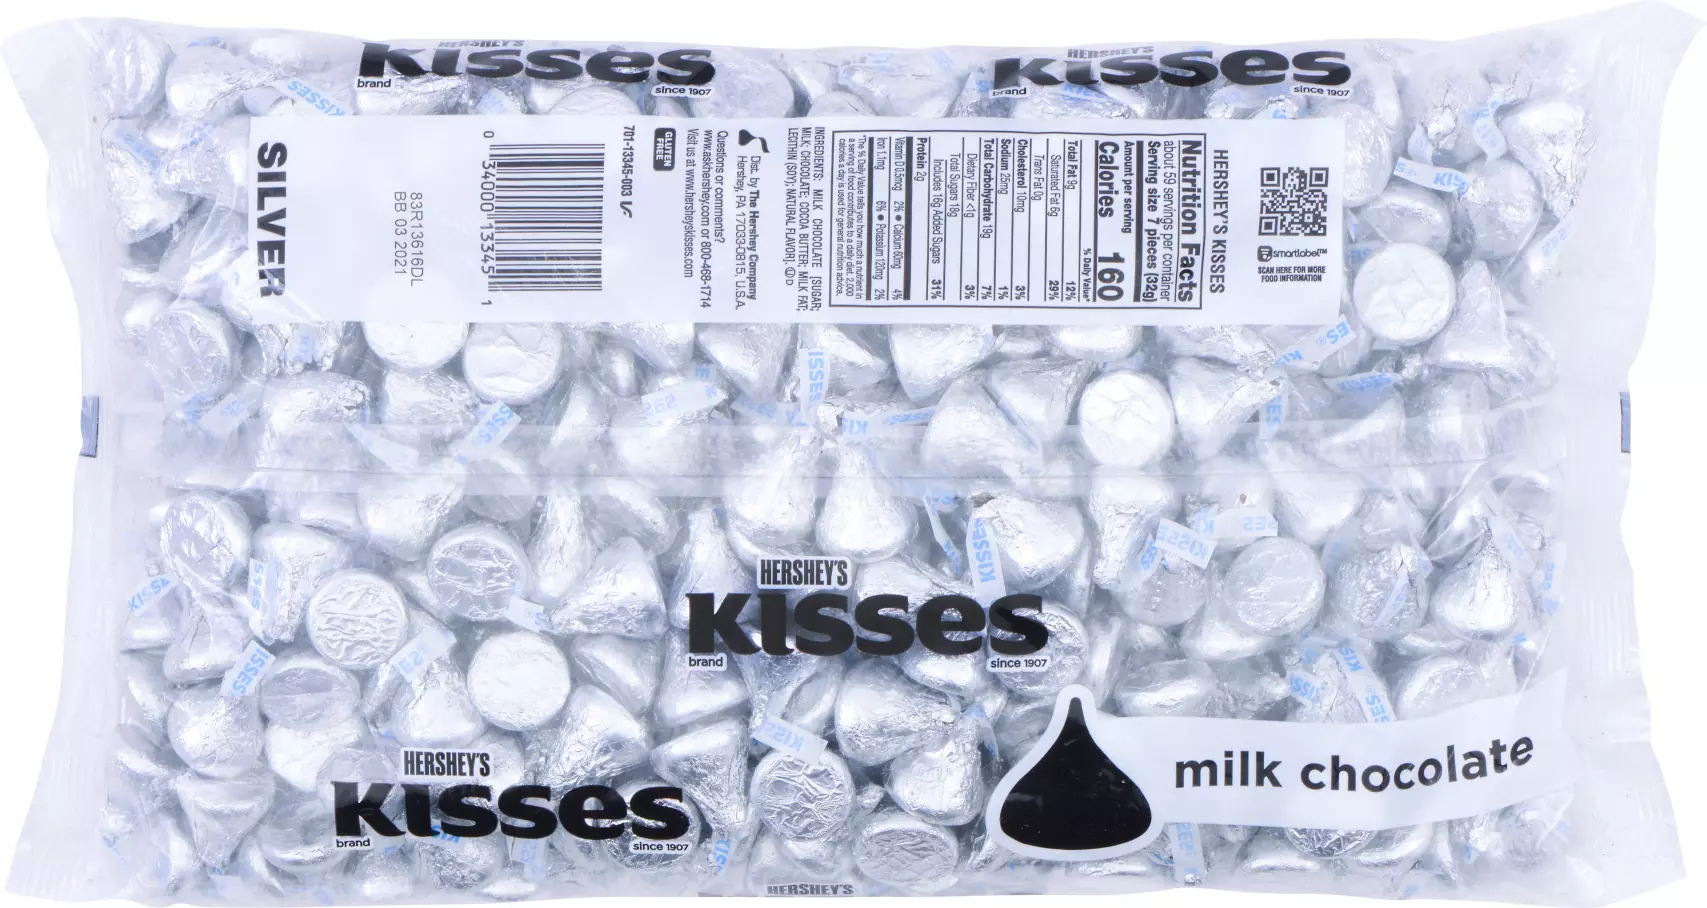 HERSHEY'S KISSES Silver Foil Milk Chocolate Candy, 66.7 oz bag - Back of Package